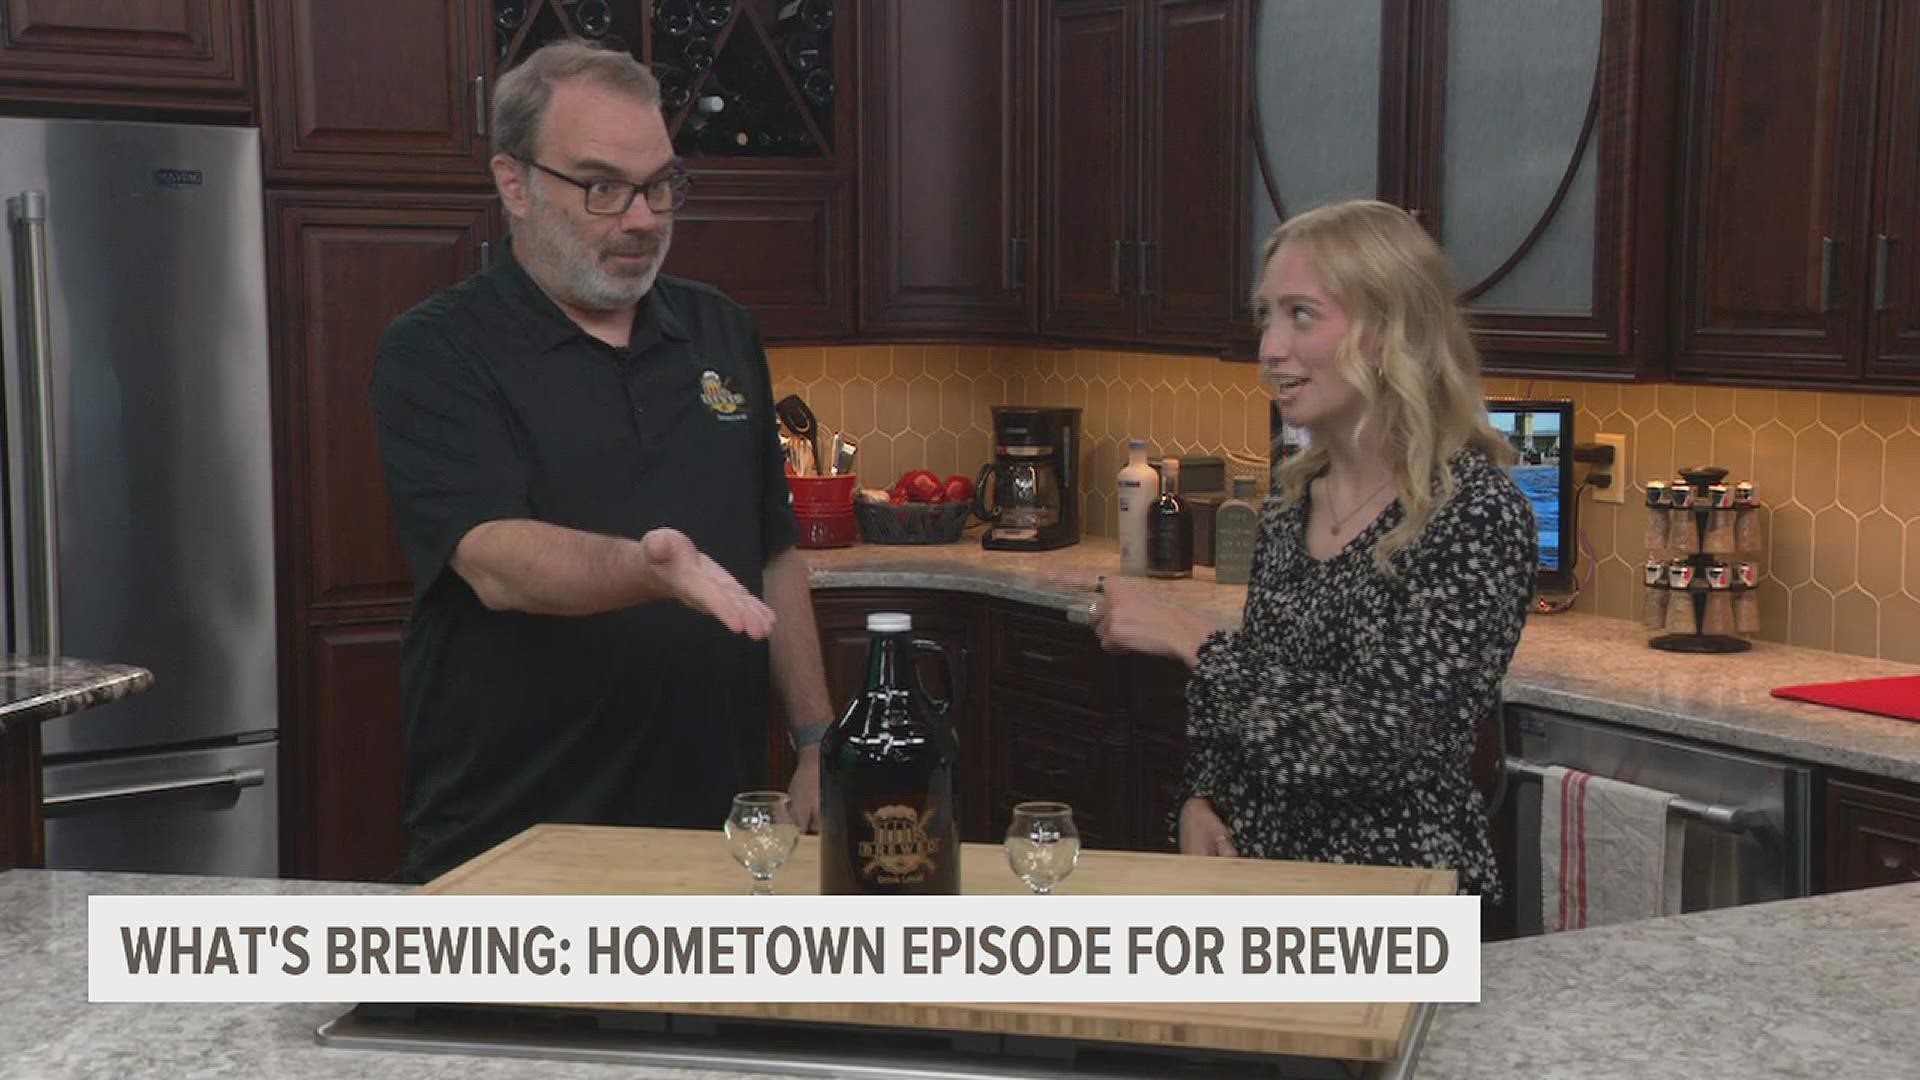 The Brewed crew is coming back to the Quad Cities to highlight some local favorites, and host Dave Levora got the chance to name a new beer from Rebels and Lions.